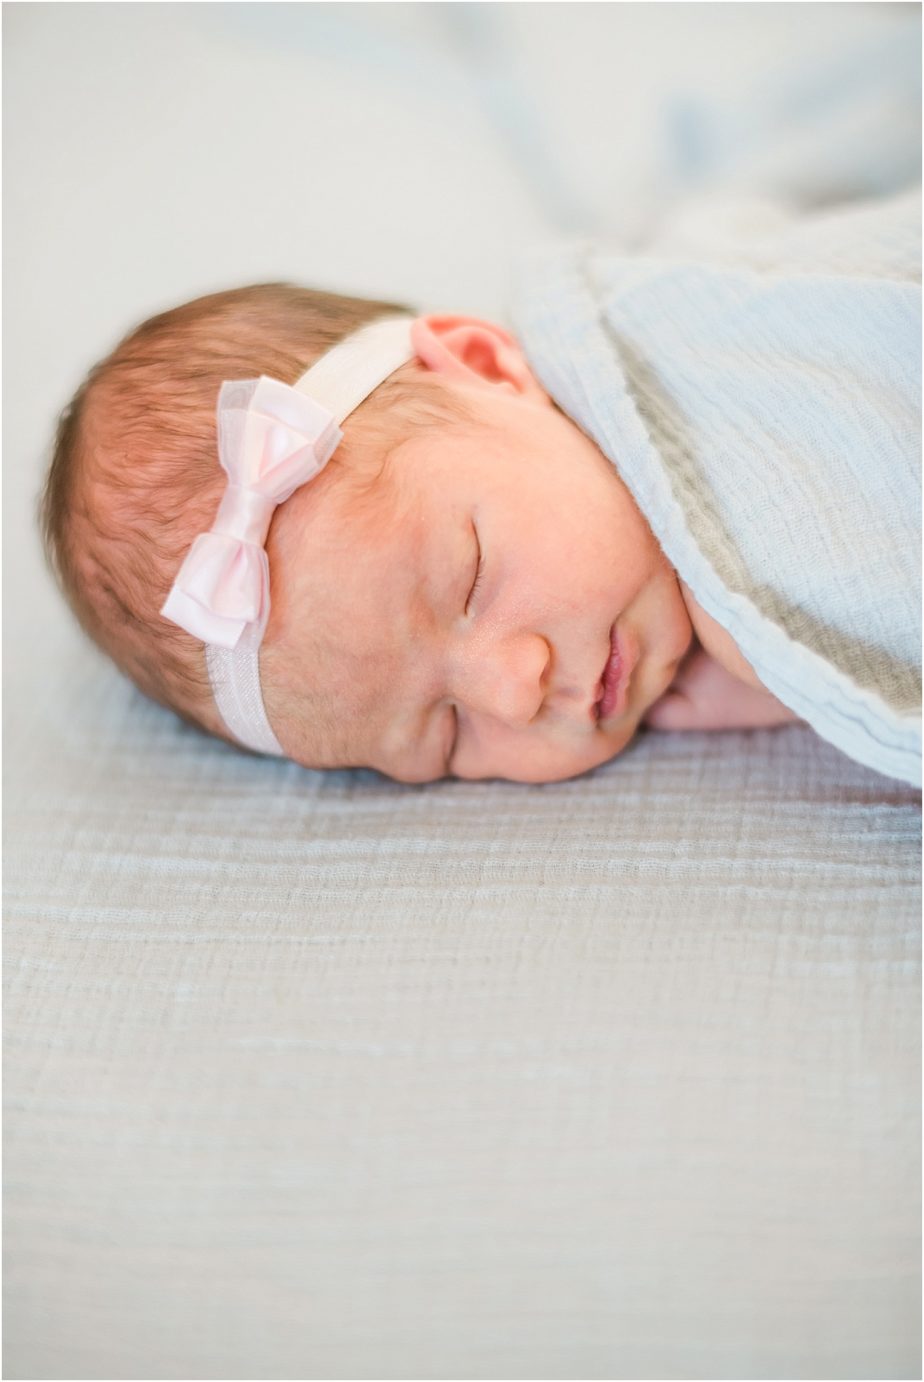 Newborn baby swaddled with bow